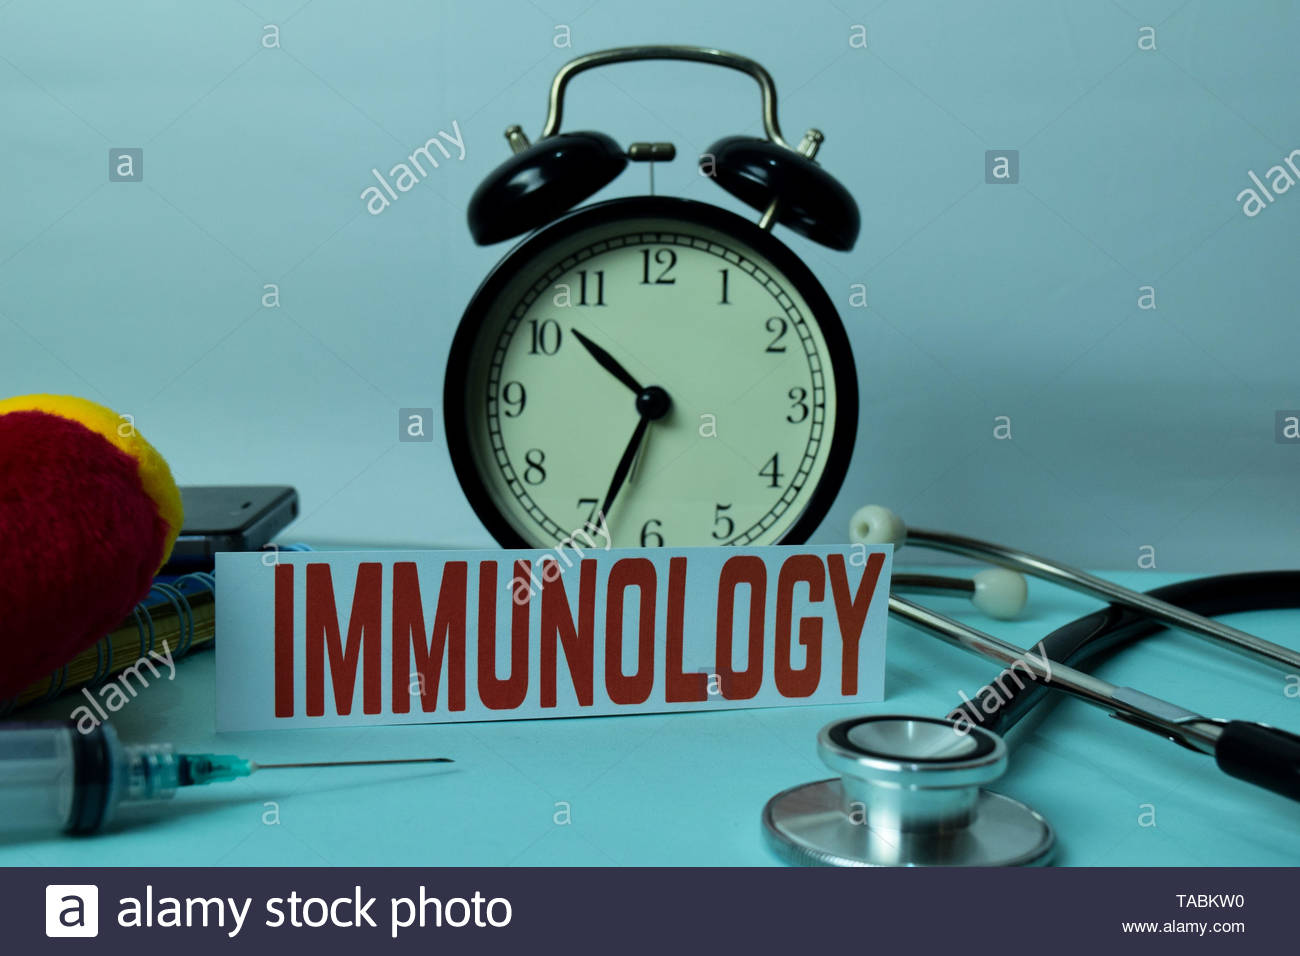 Immunology Planning On Background Of Working Table With Office